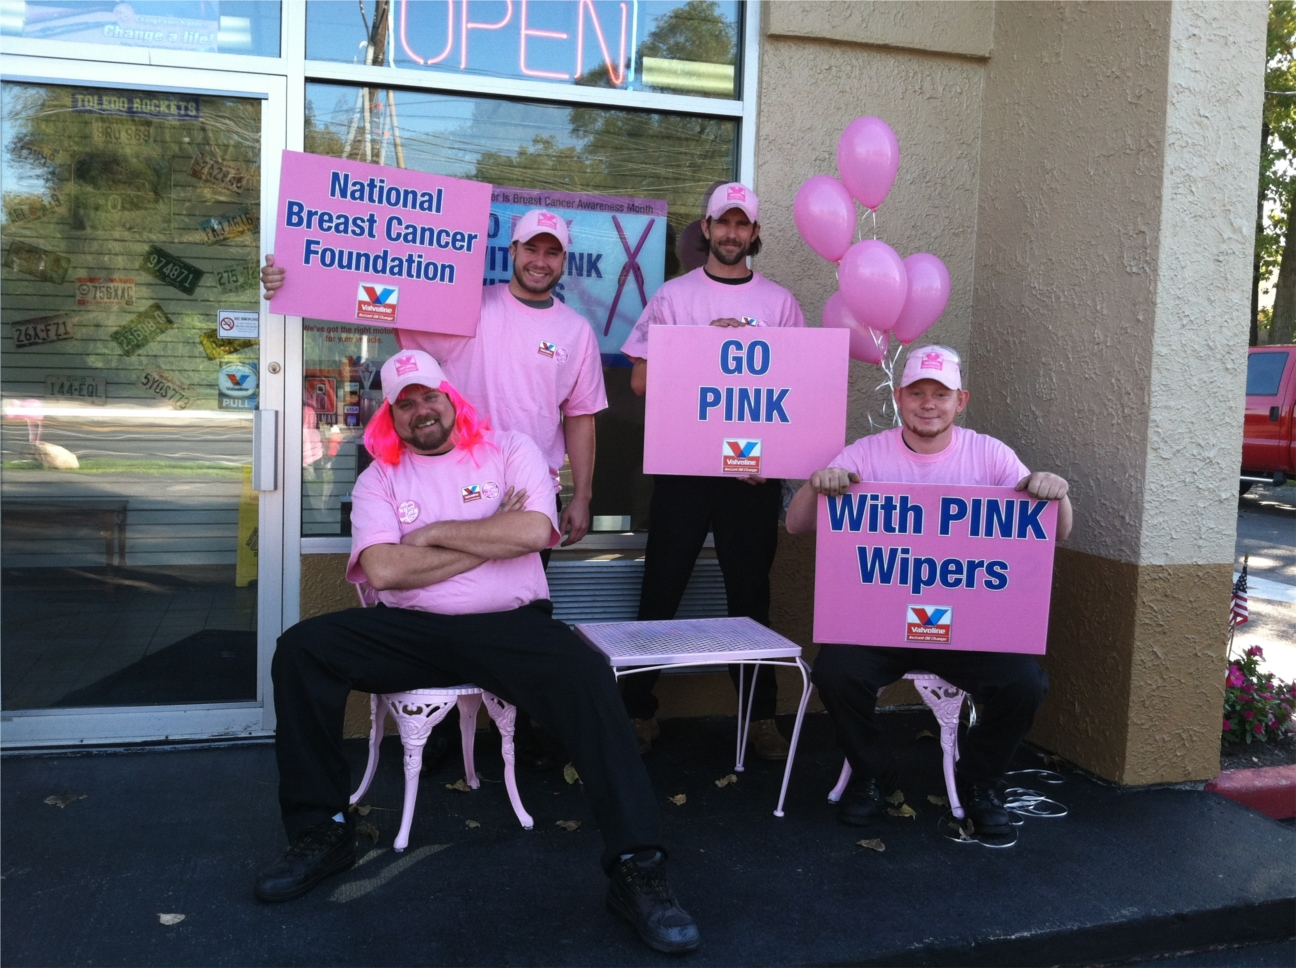 Each October Valvoline Instant Oil Change sells pink wipers to raise money and awareness for National Breast Cancer Foundation, inc.